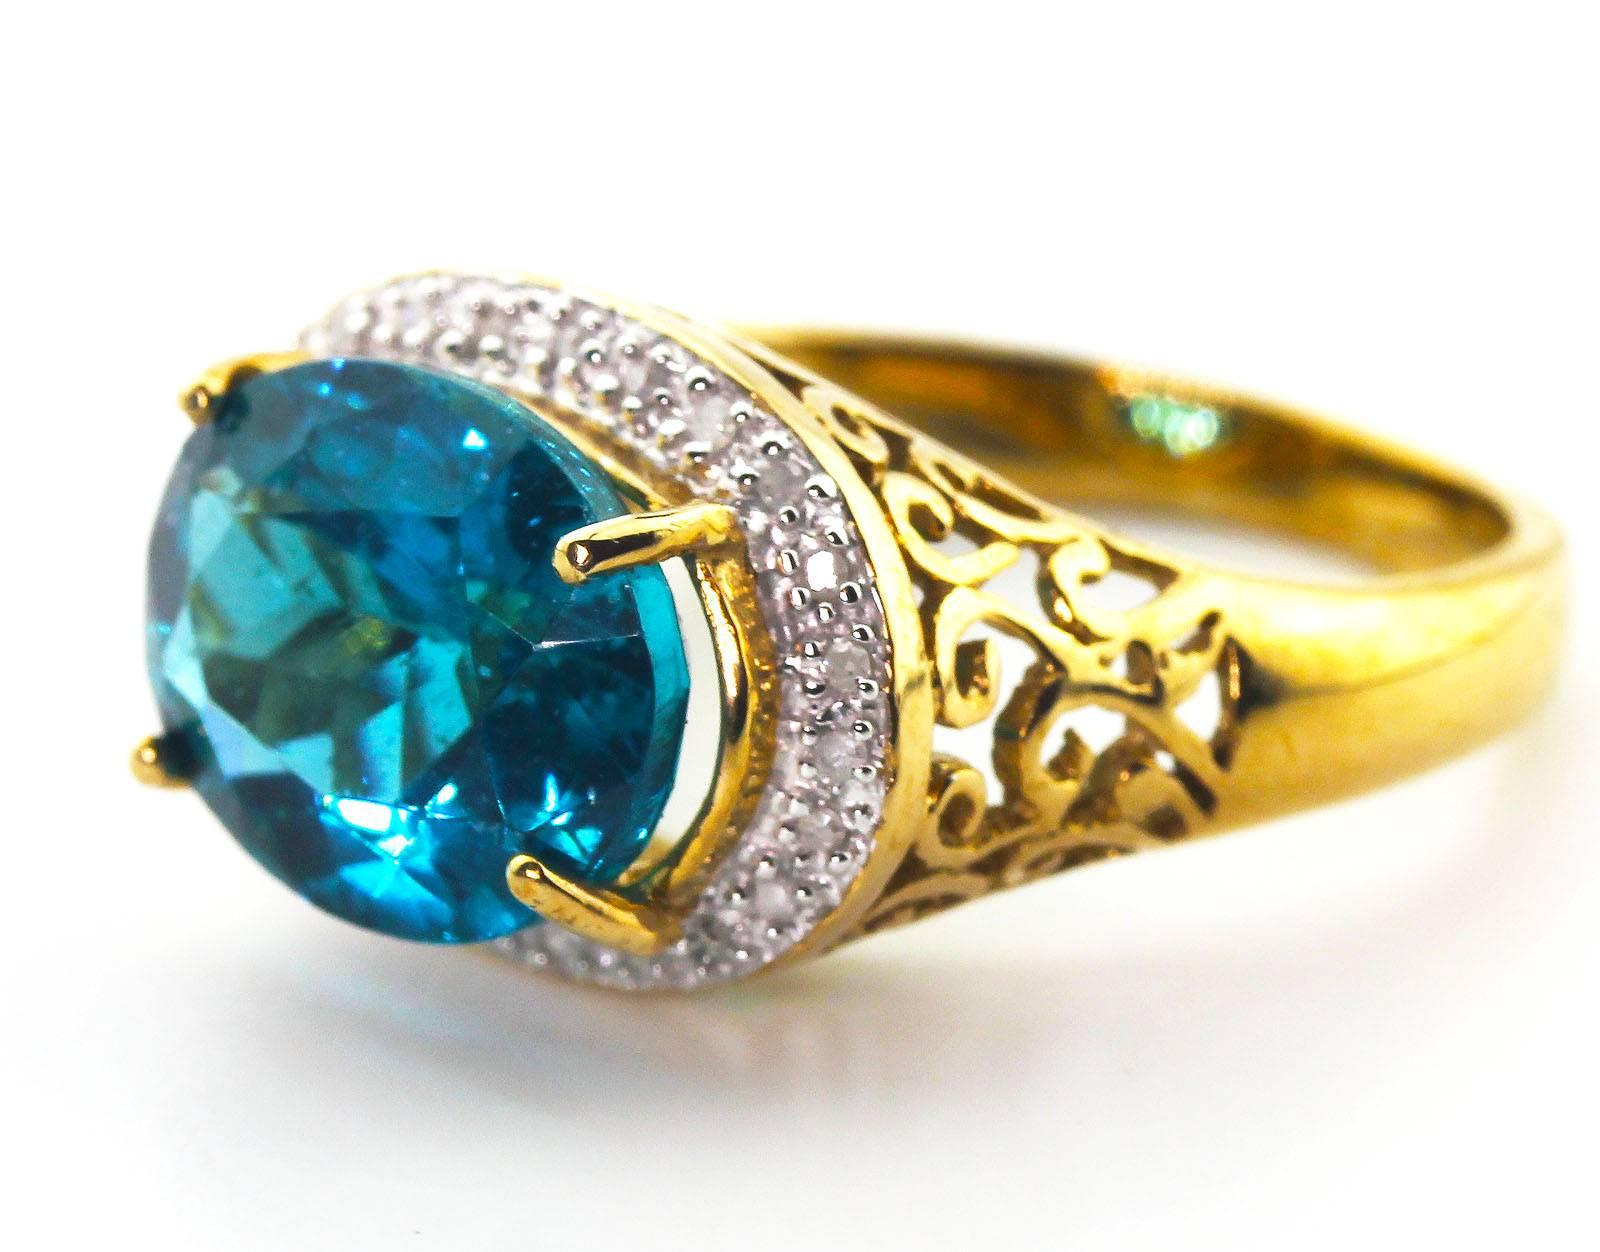 This flawless glittering 5.2 Carat unique natural blue Apatite from Madagascar is adorned with tiny little sparkling diamonds set in 10 KT yellow gold ring.  The Apatite measures 12 mm x 10 mm and the ring is a size 7.5 sizable.  More from this